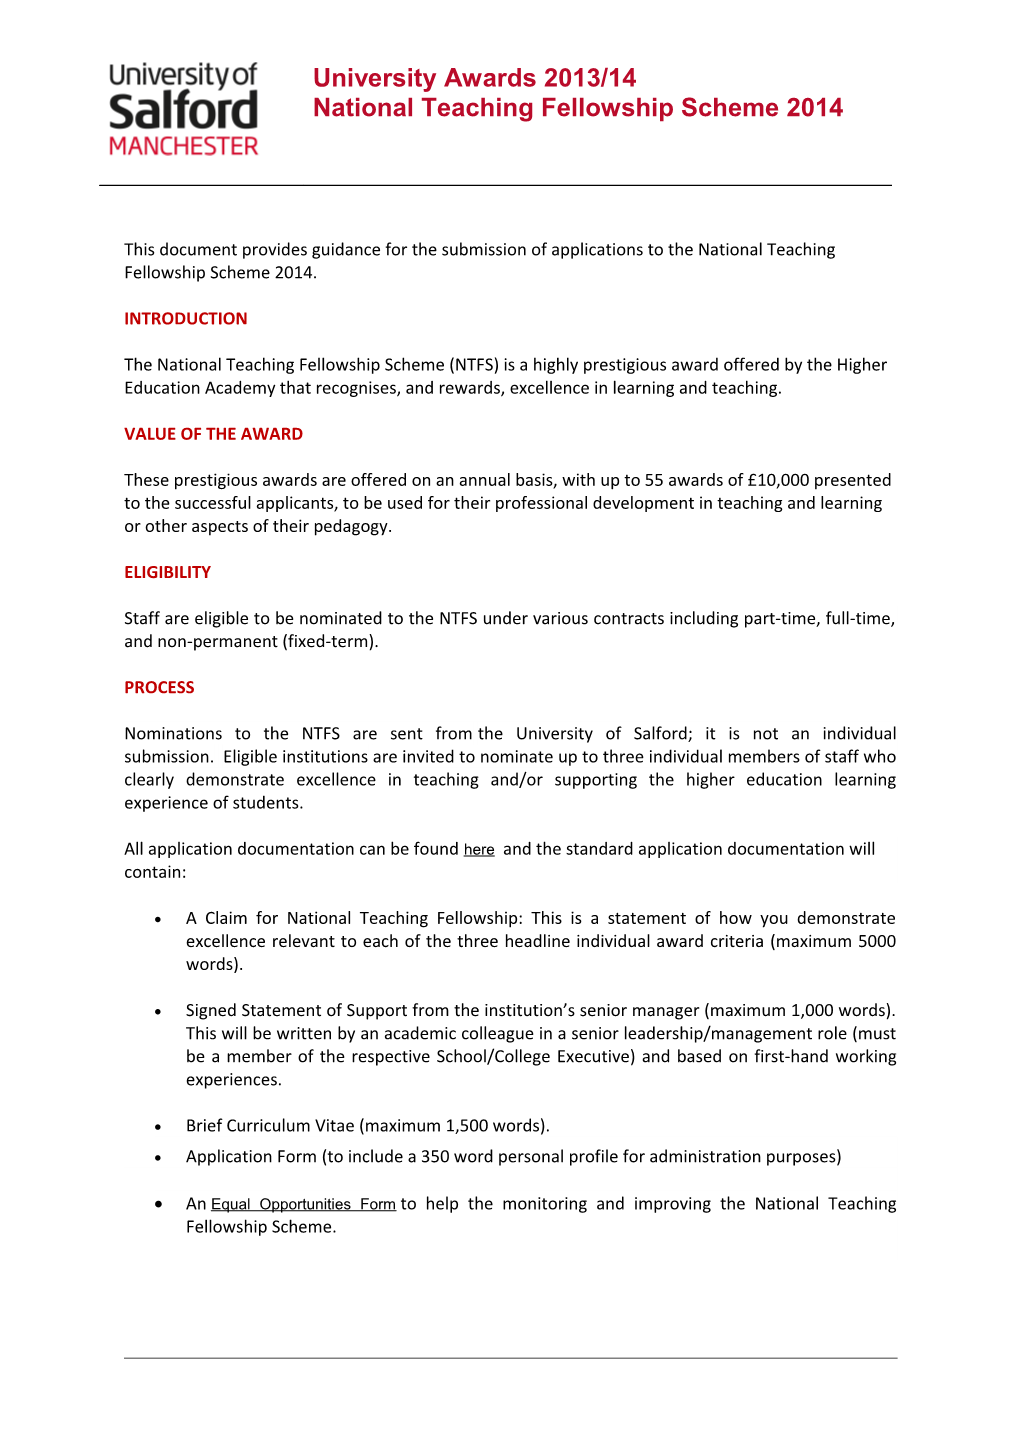 This Document Provides Guidance Forthe Submission of Applications to the National Teaching